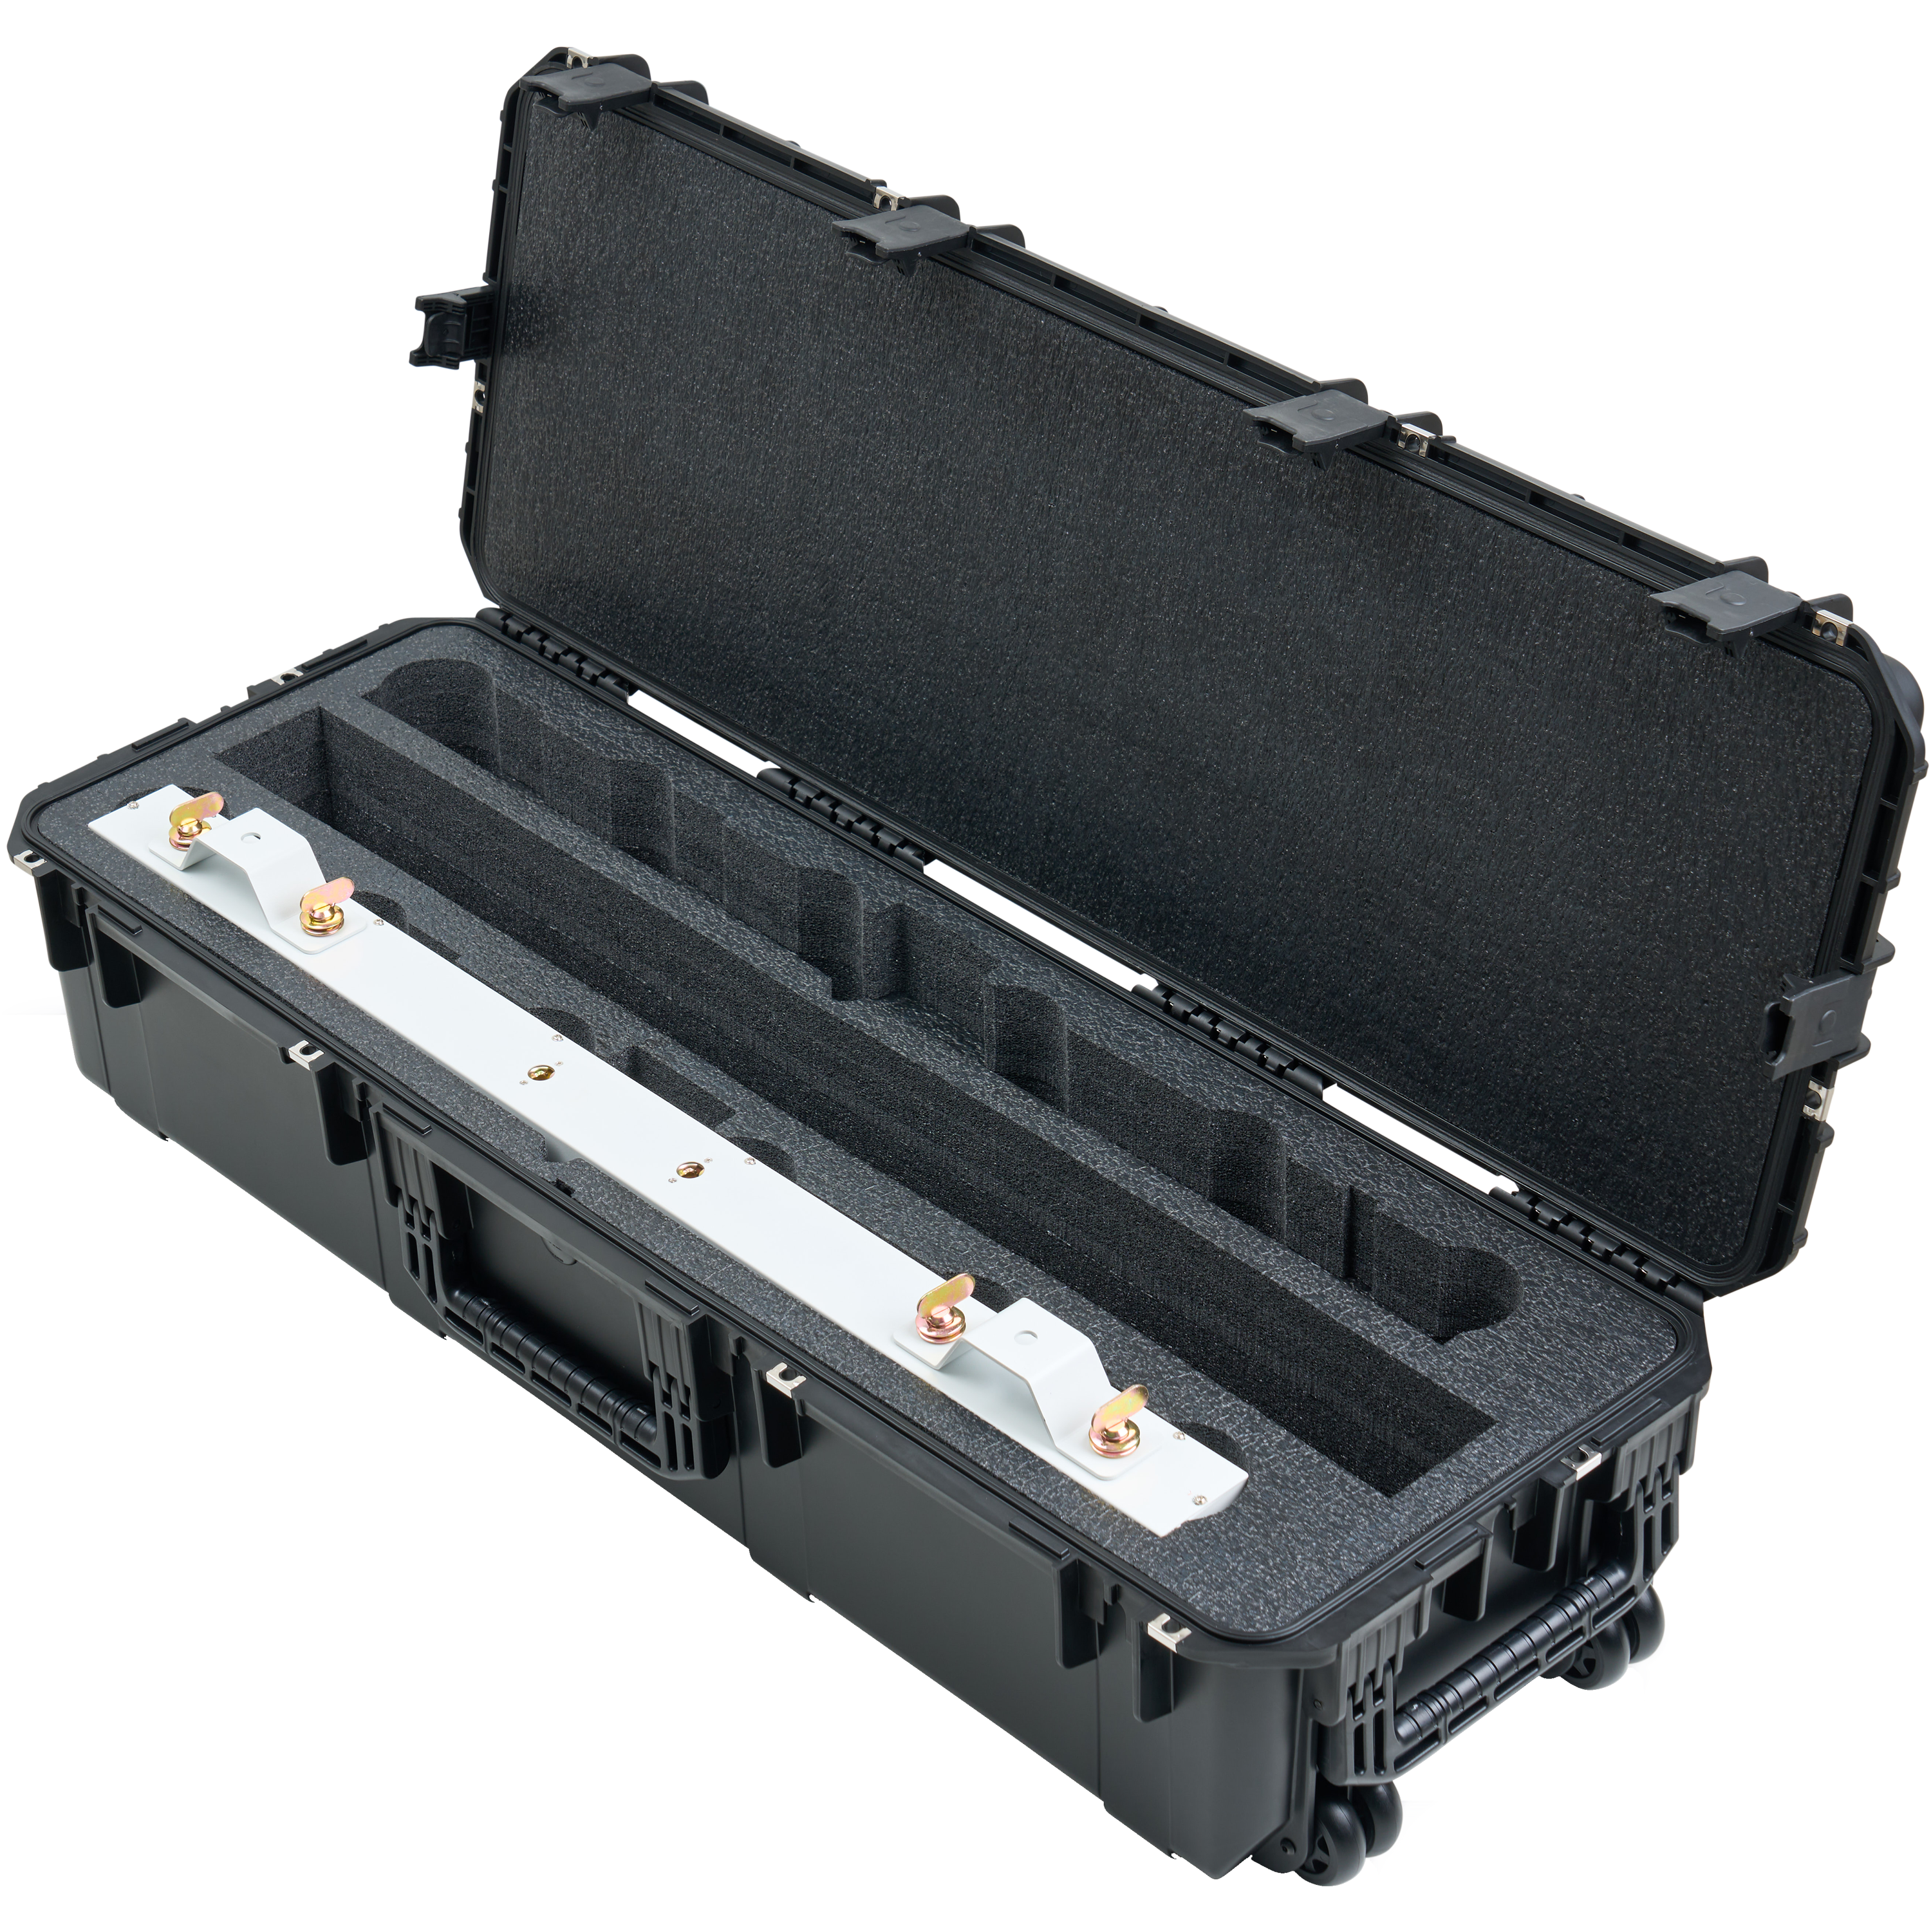 BYFP ipCase for 2x Chauvet Pinspot Bars